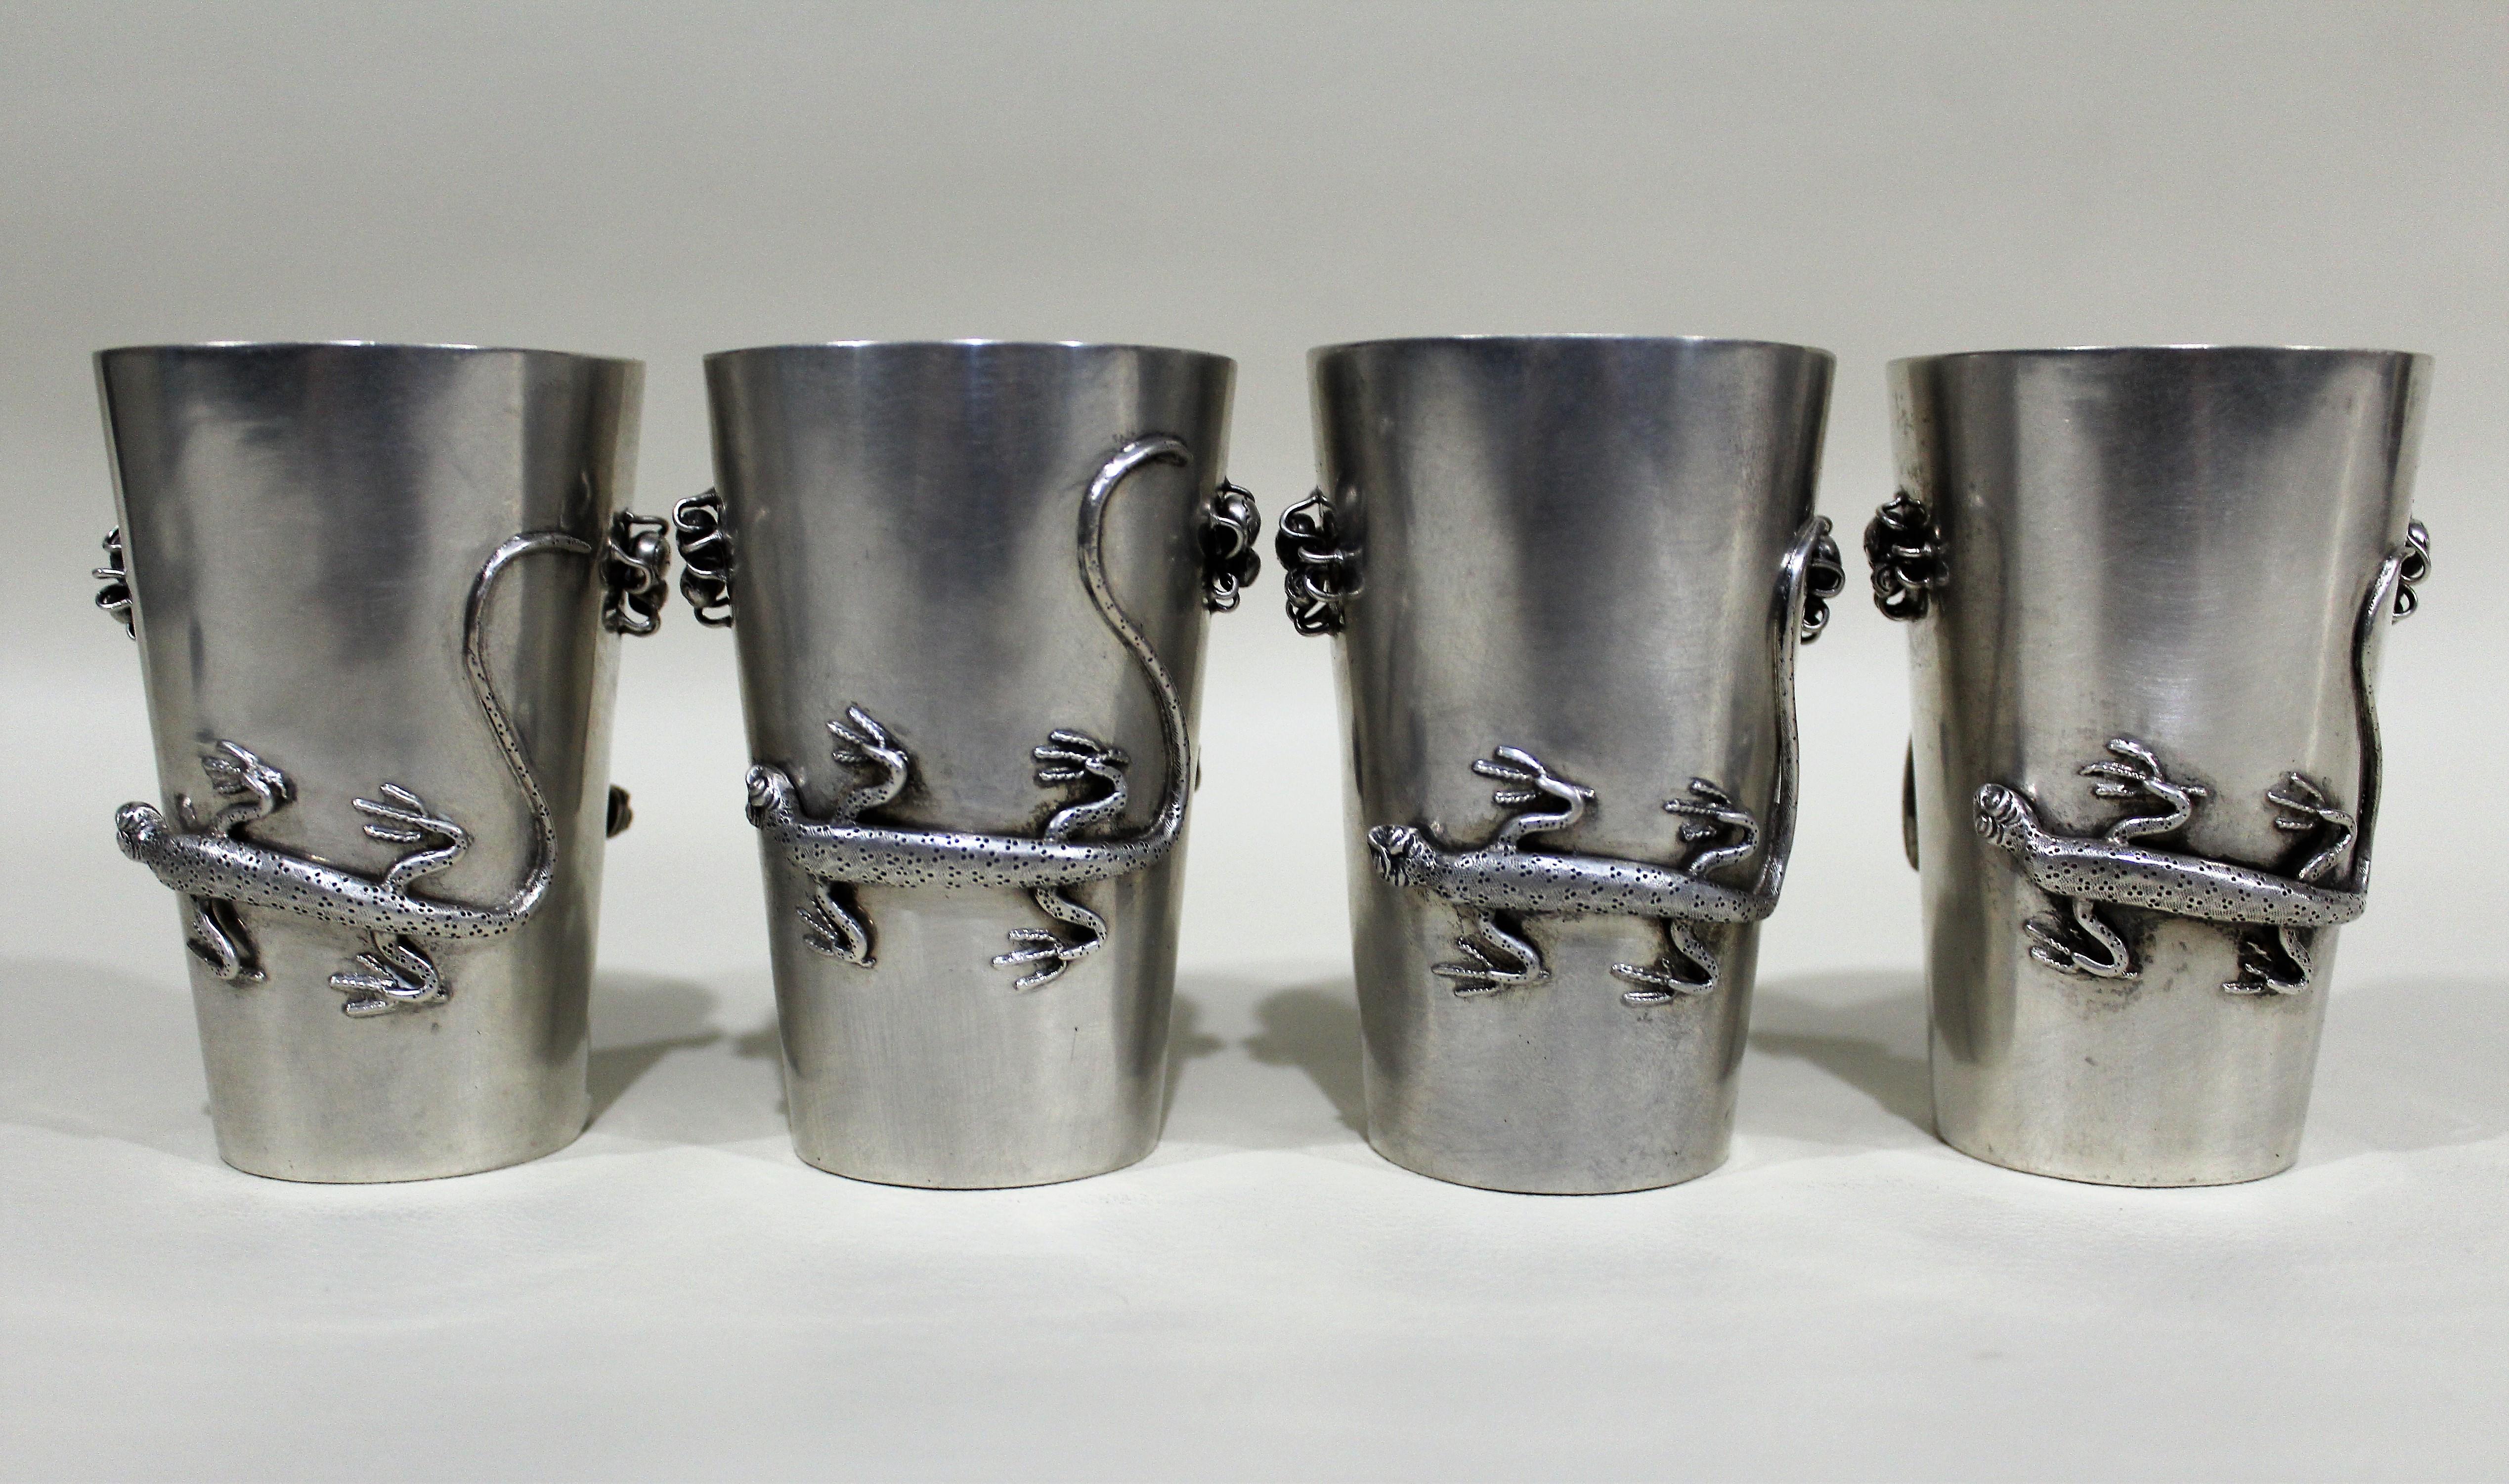 Set of four sterling silver antique Chinese export beakers or drinking cups made by the Hung Chong Co. of Shanghai with detailed applied figural decorative salamanders and spiders on alternate sides of each cup. The beakers are clearly hallmarked on